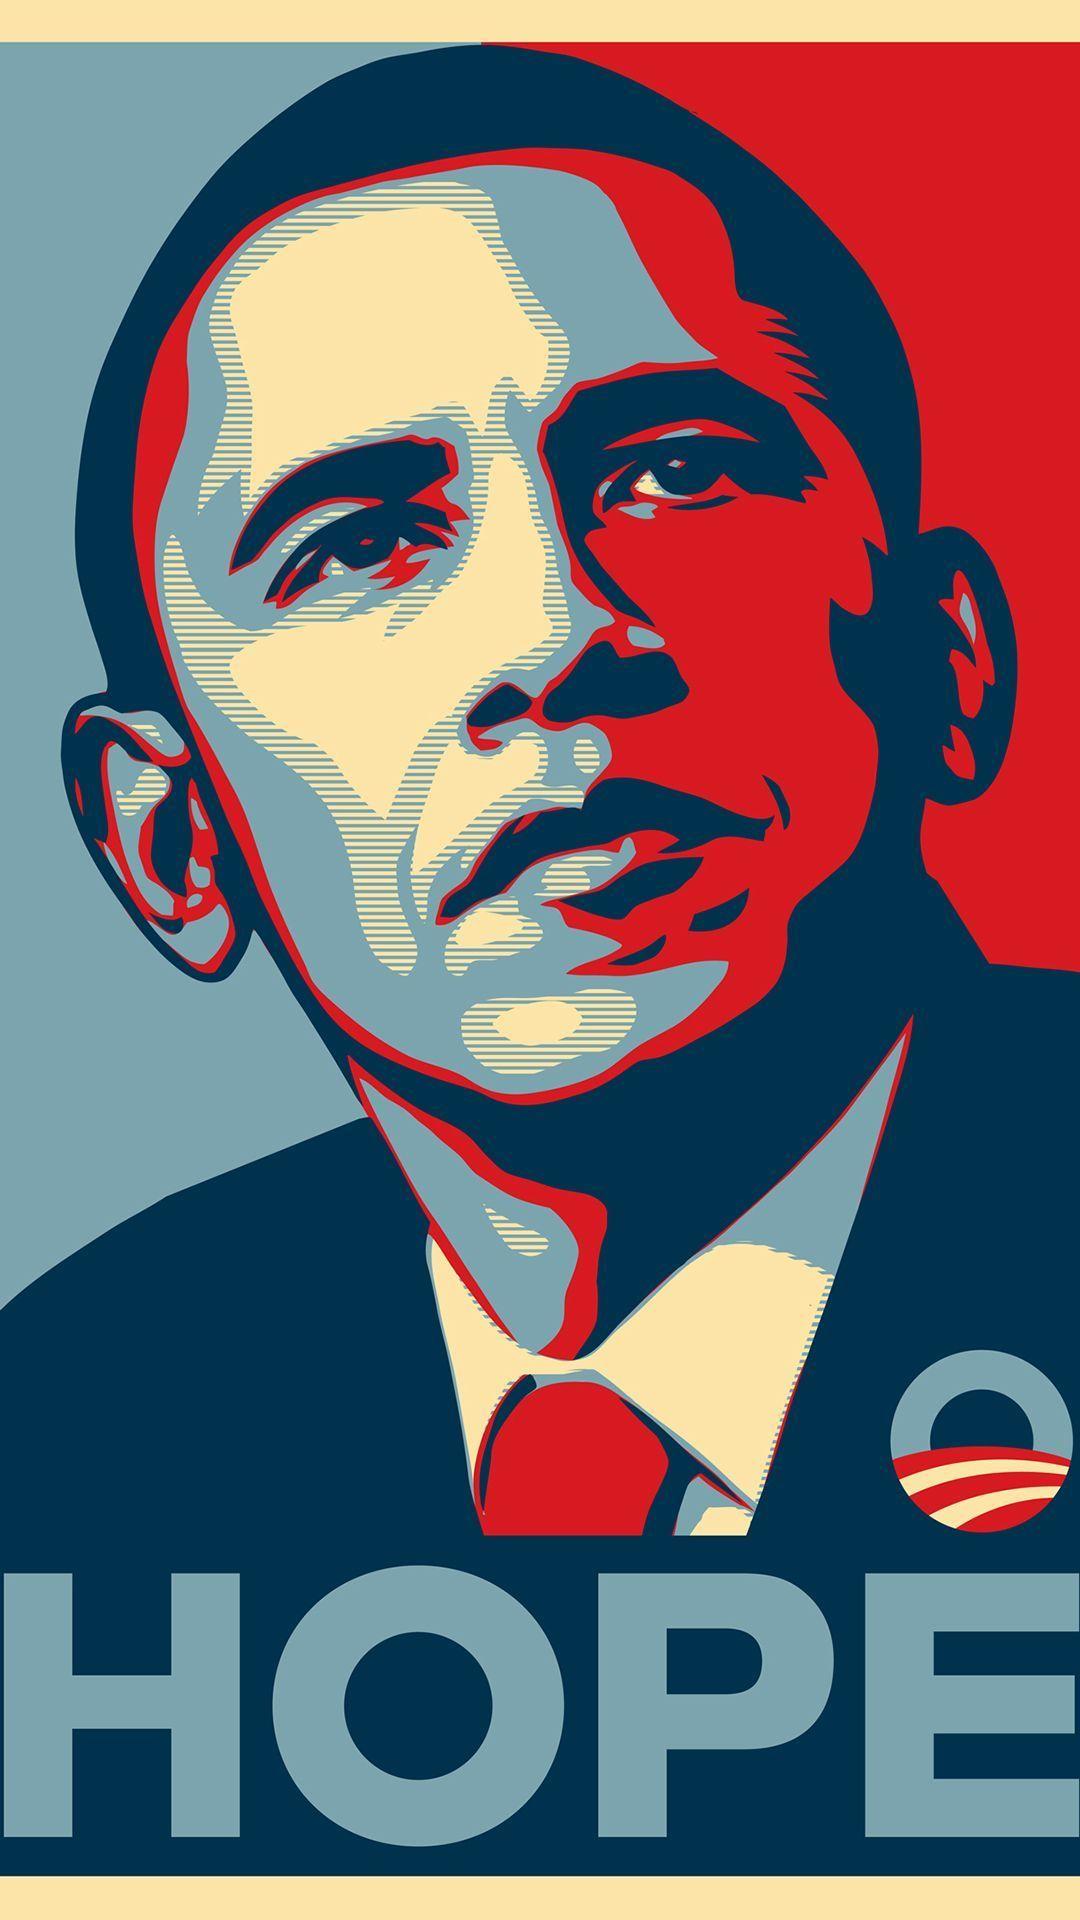 Obama Hope htc one wallpaper htc one wallpaper, free